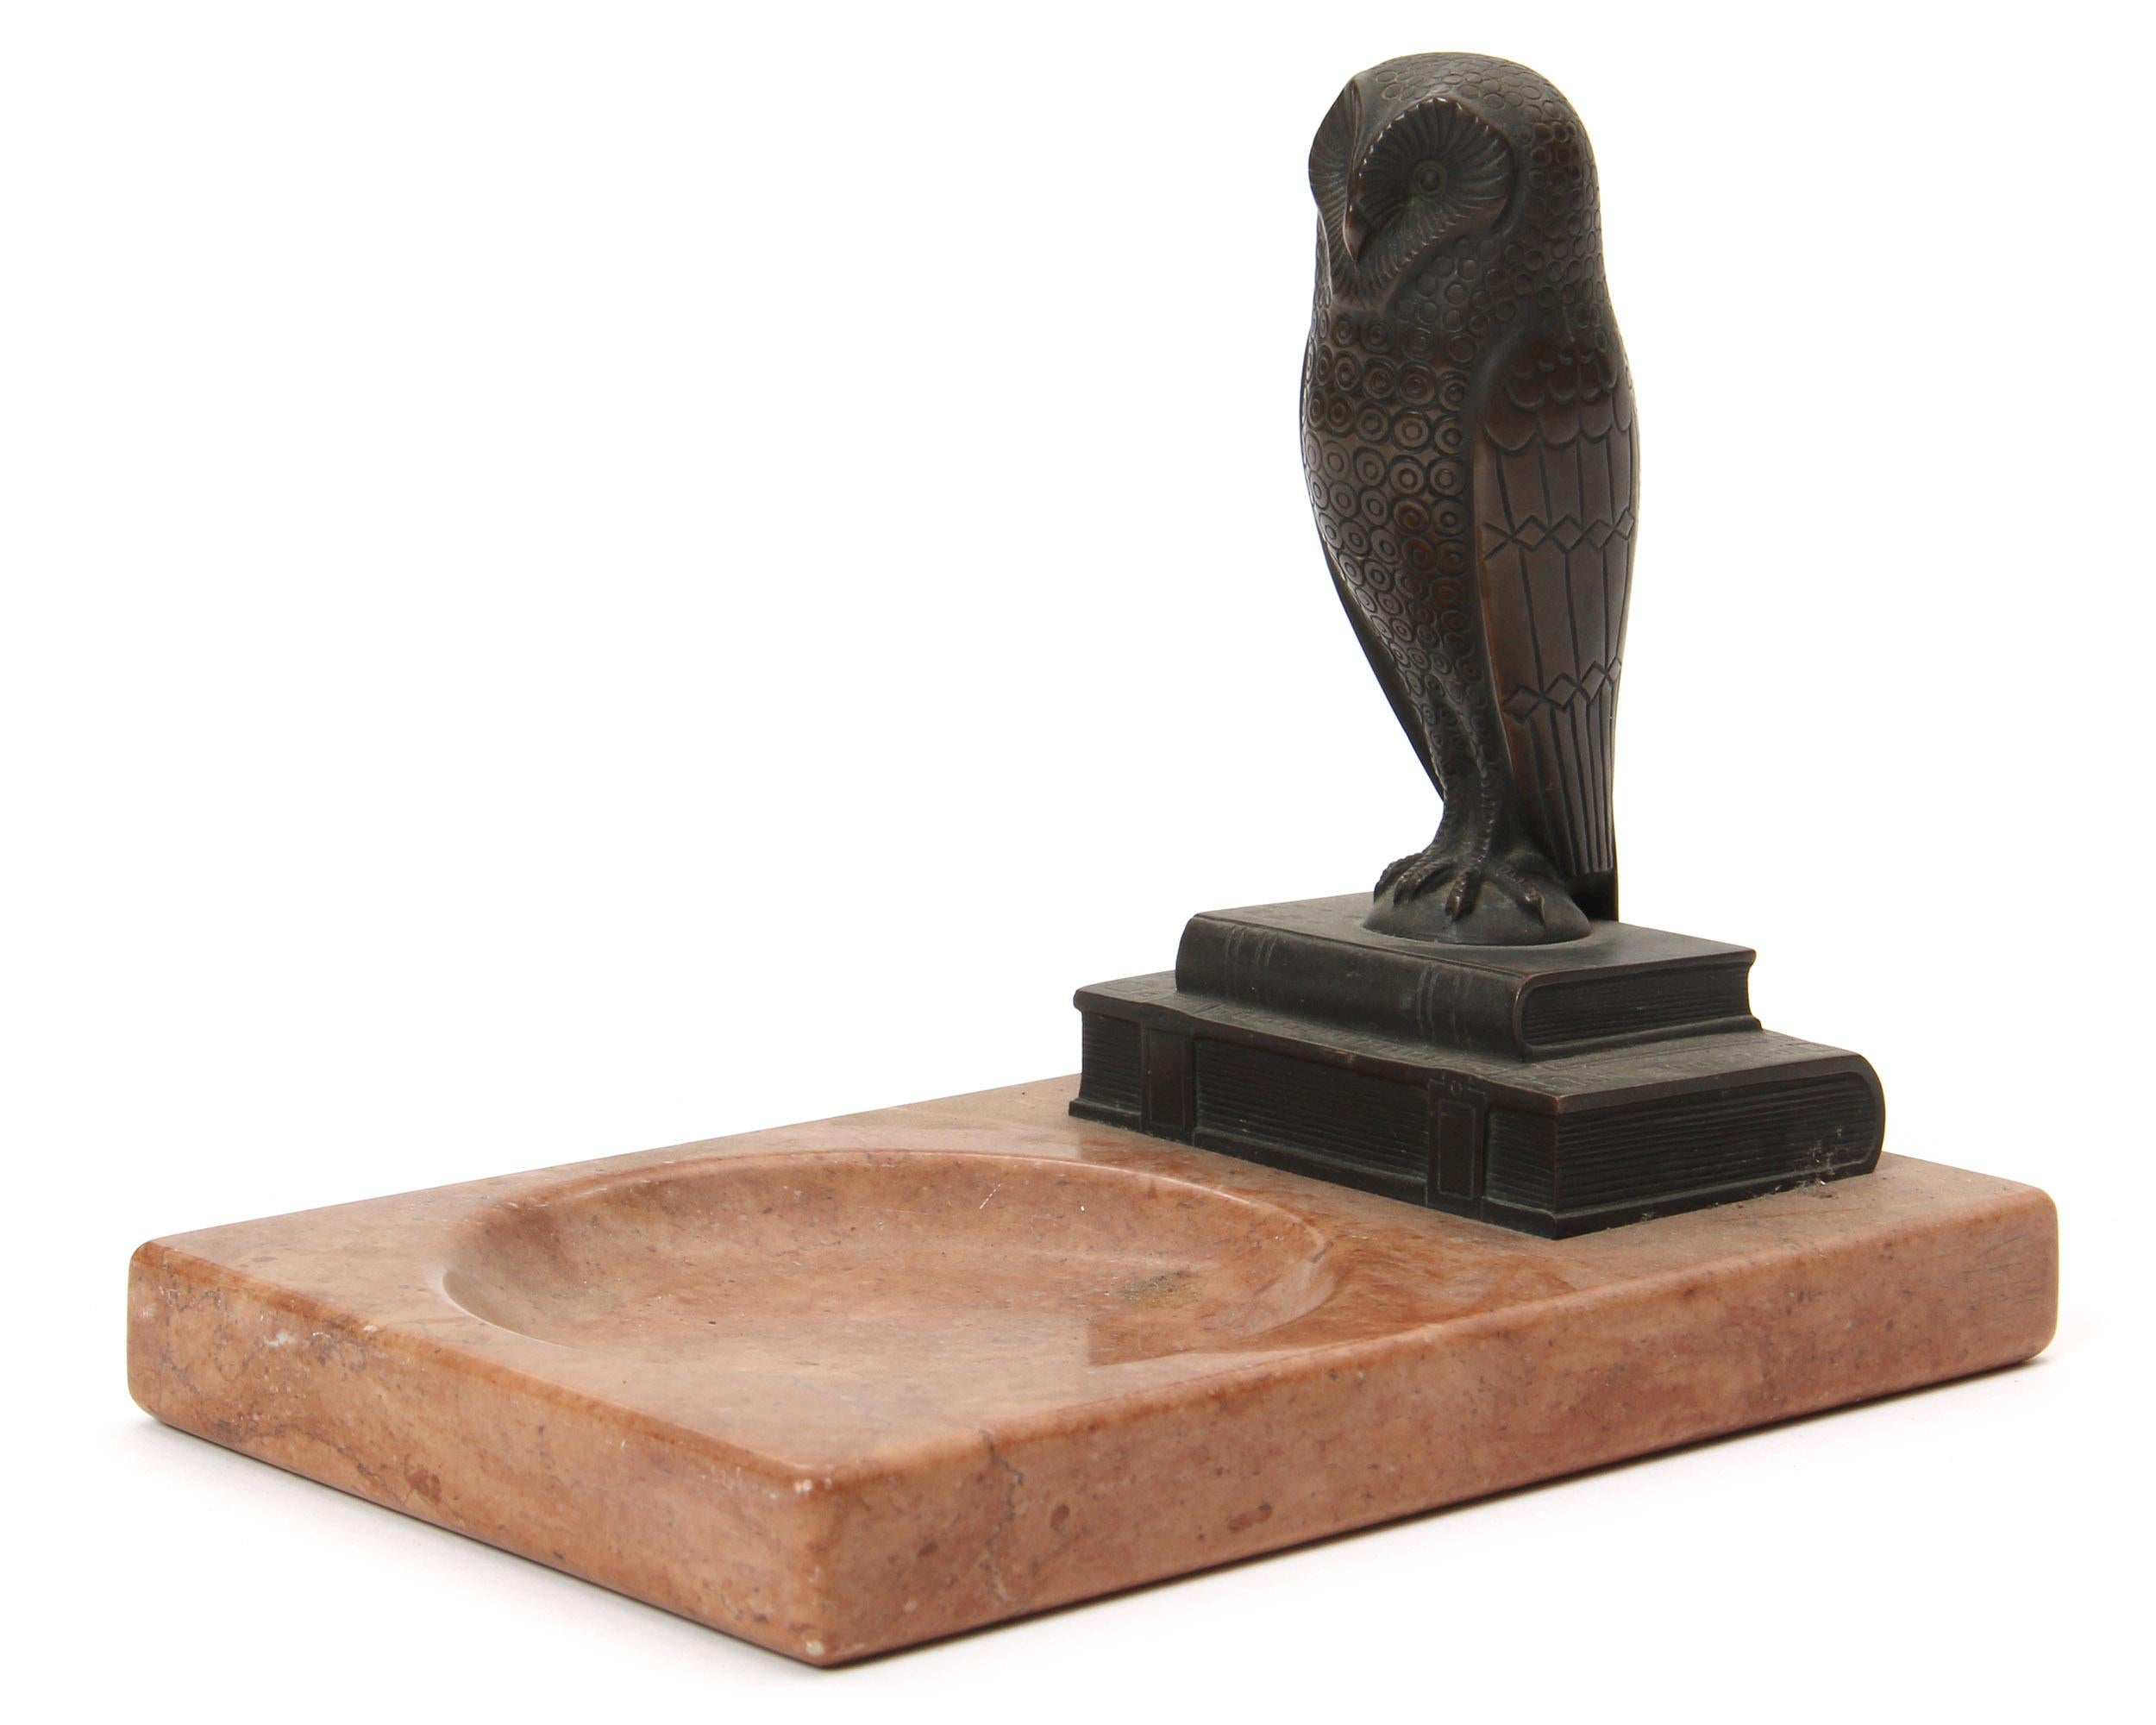 An Art Deco marble ashtray with a bronze owl standing on two books, circa 1940s.